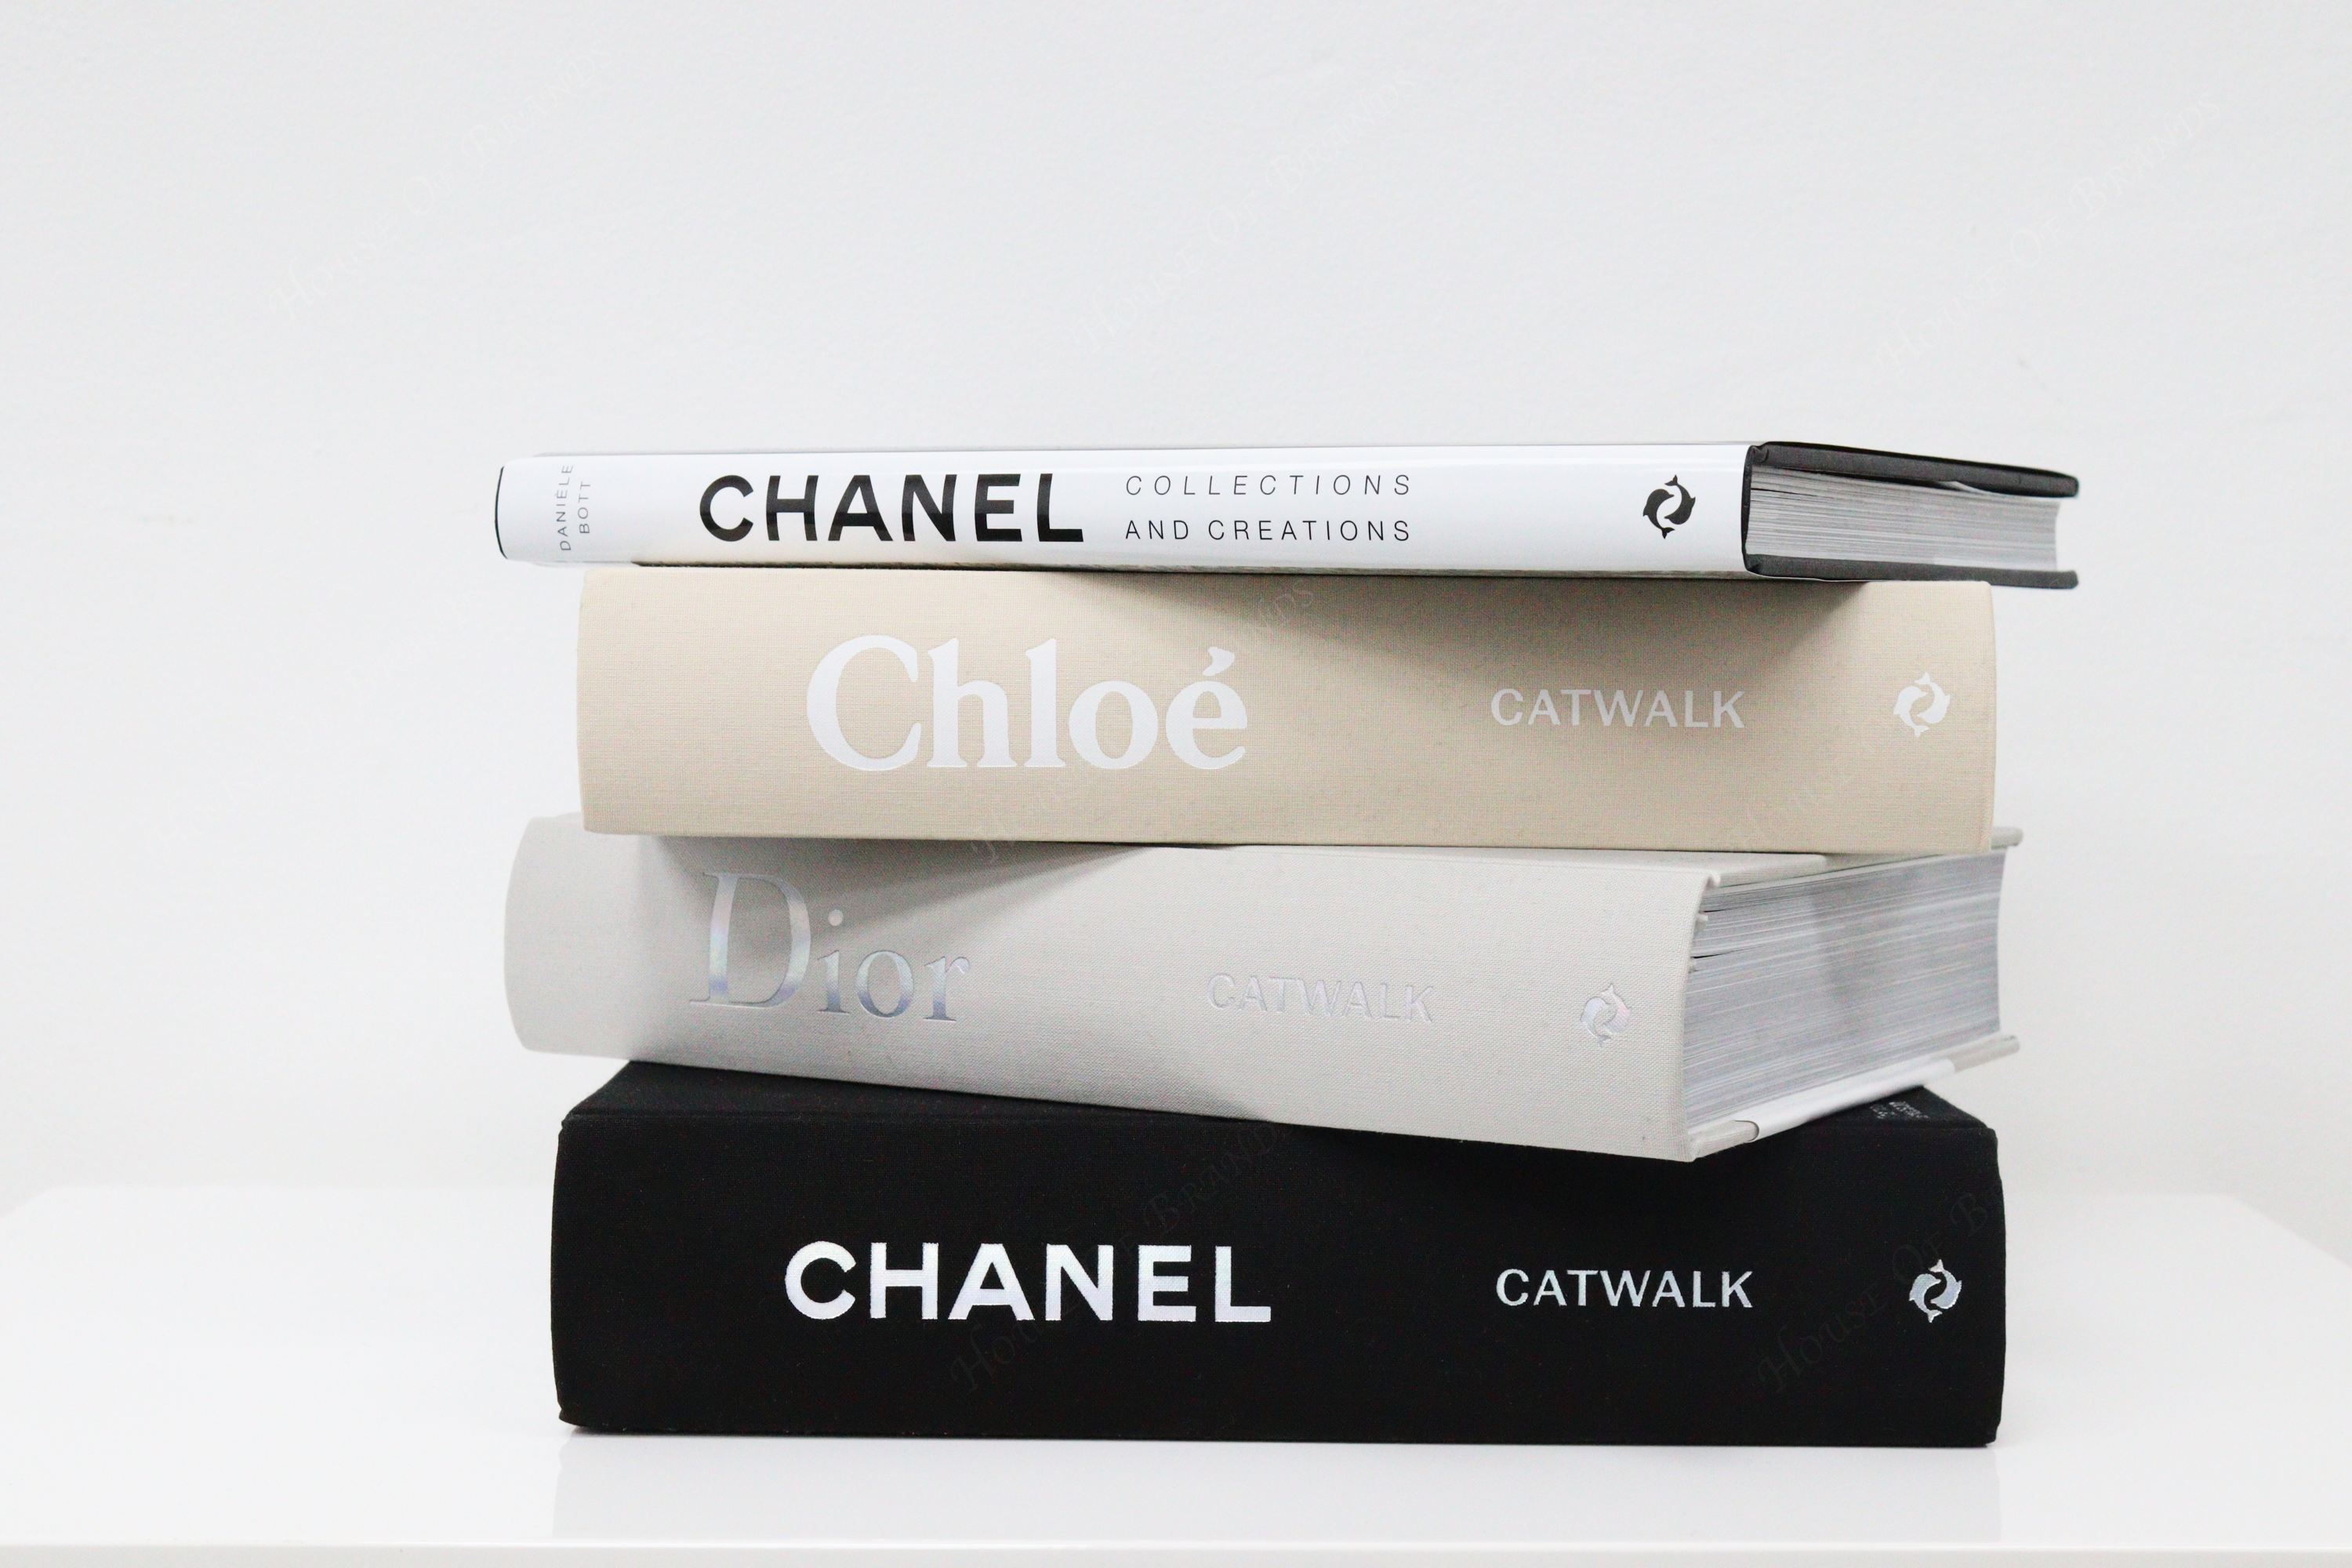 THAMES & HUDSON Chanel Collections Book